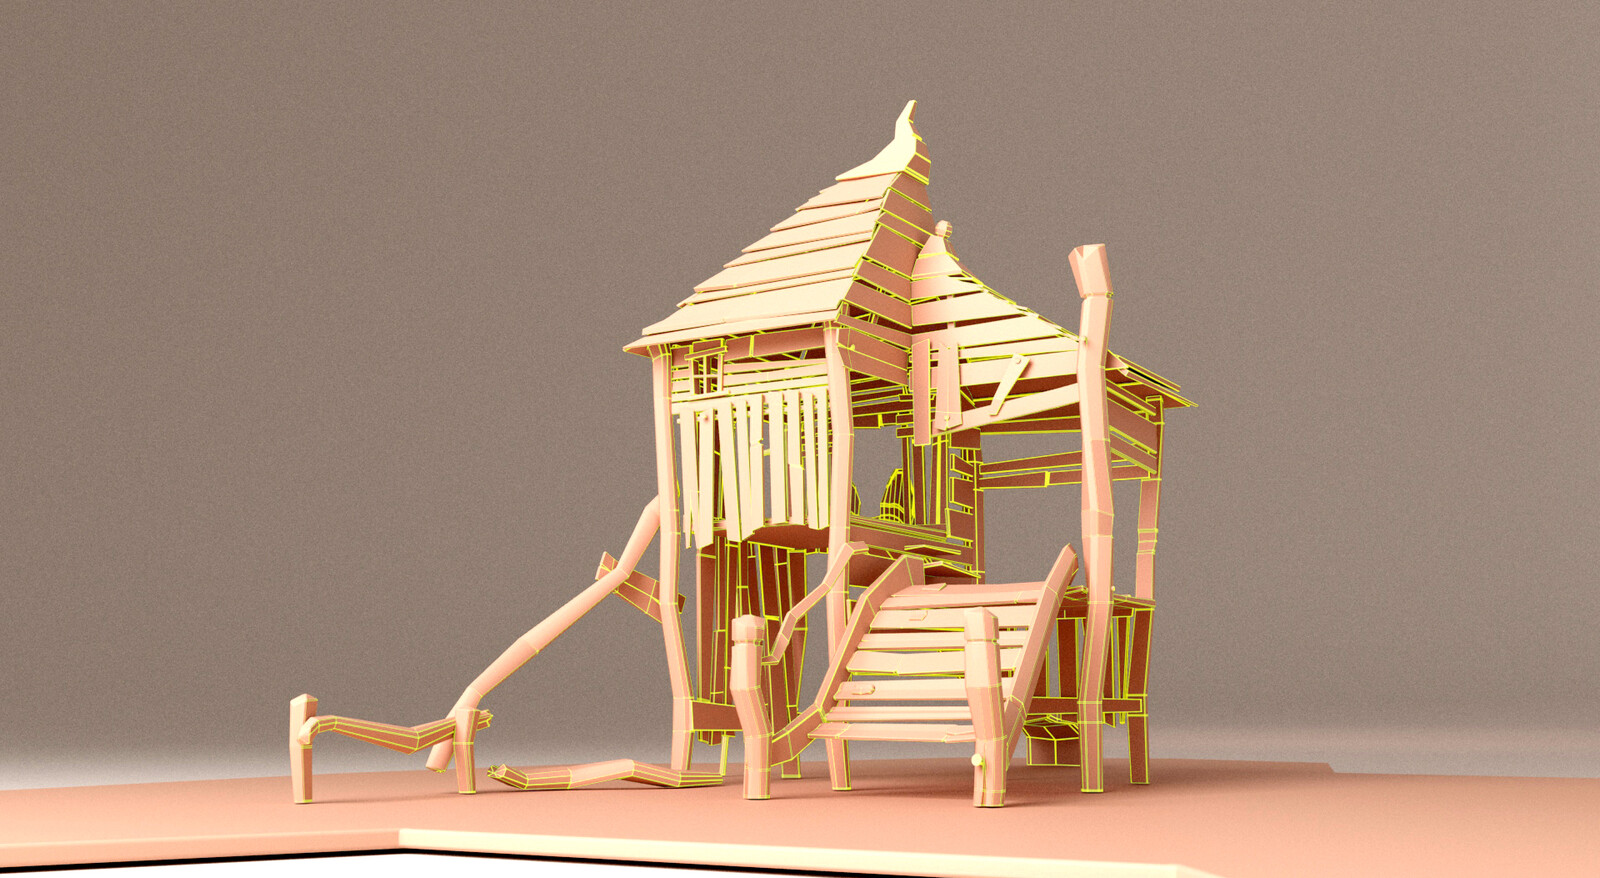 3D model, close-up, main building, front view, with wireframe